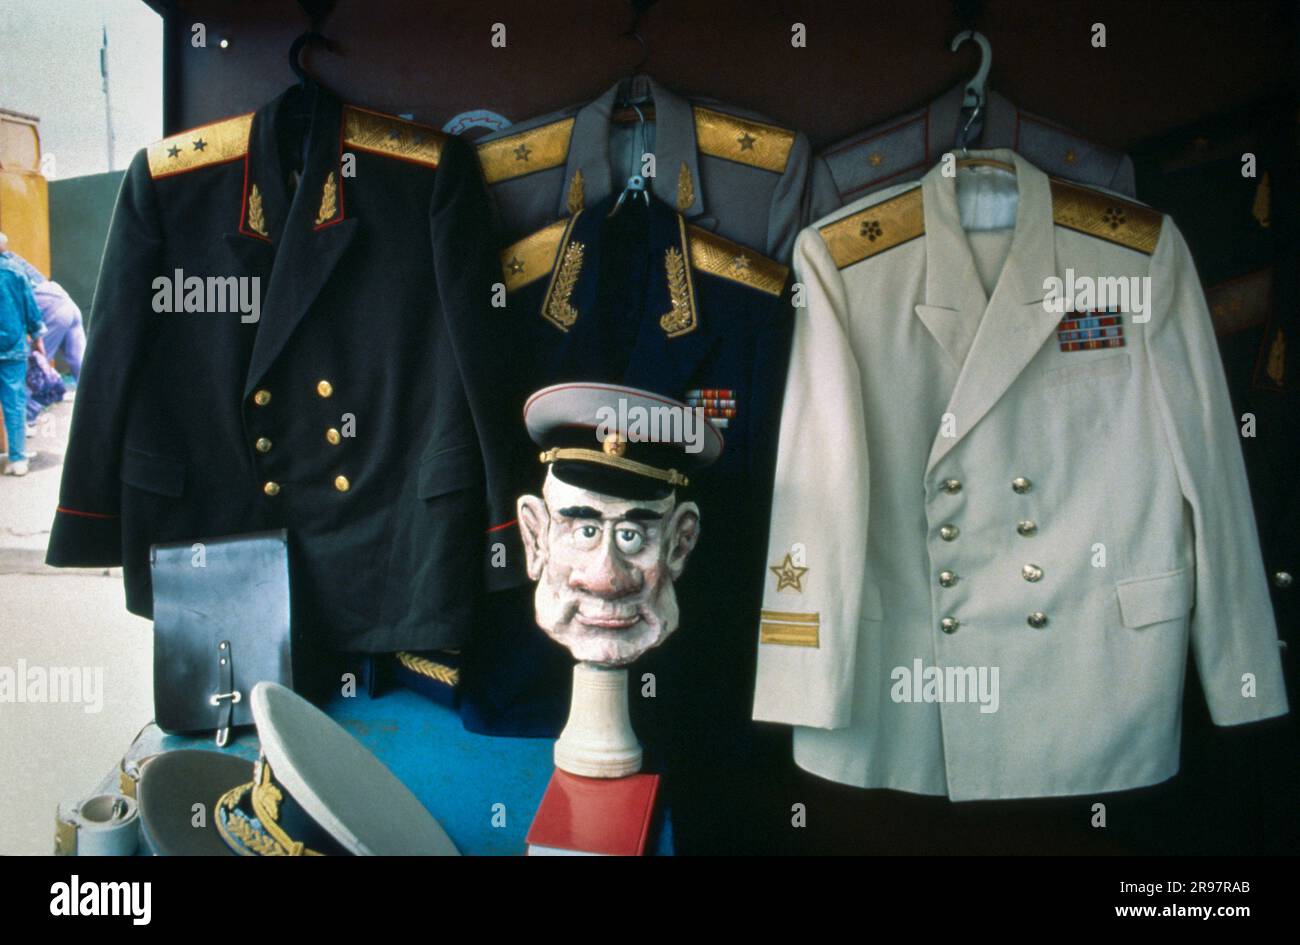 Old Soviet military dress uniforms for sale at the Izmailovo Market, Moscow, Russia. 1993 Stock Photo